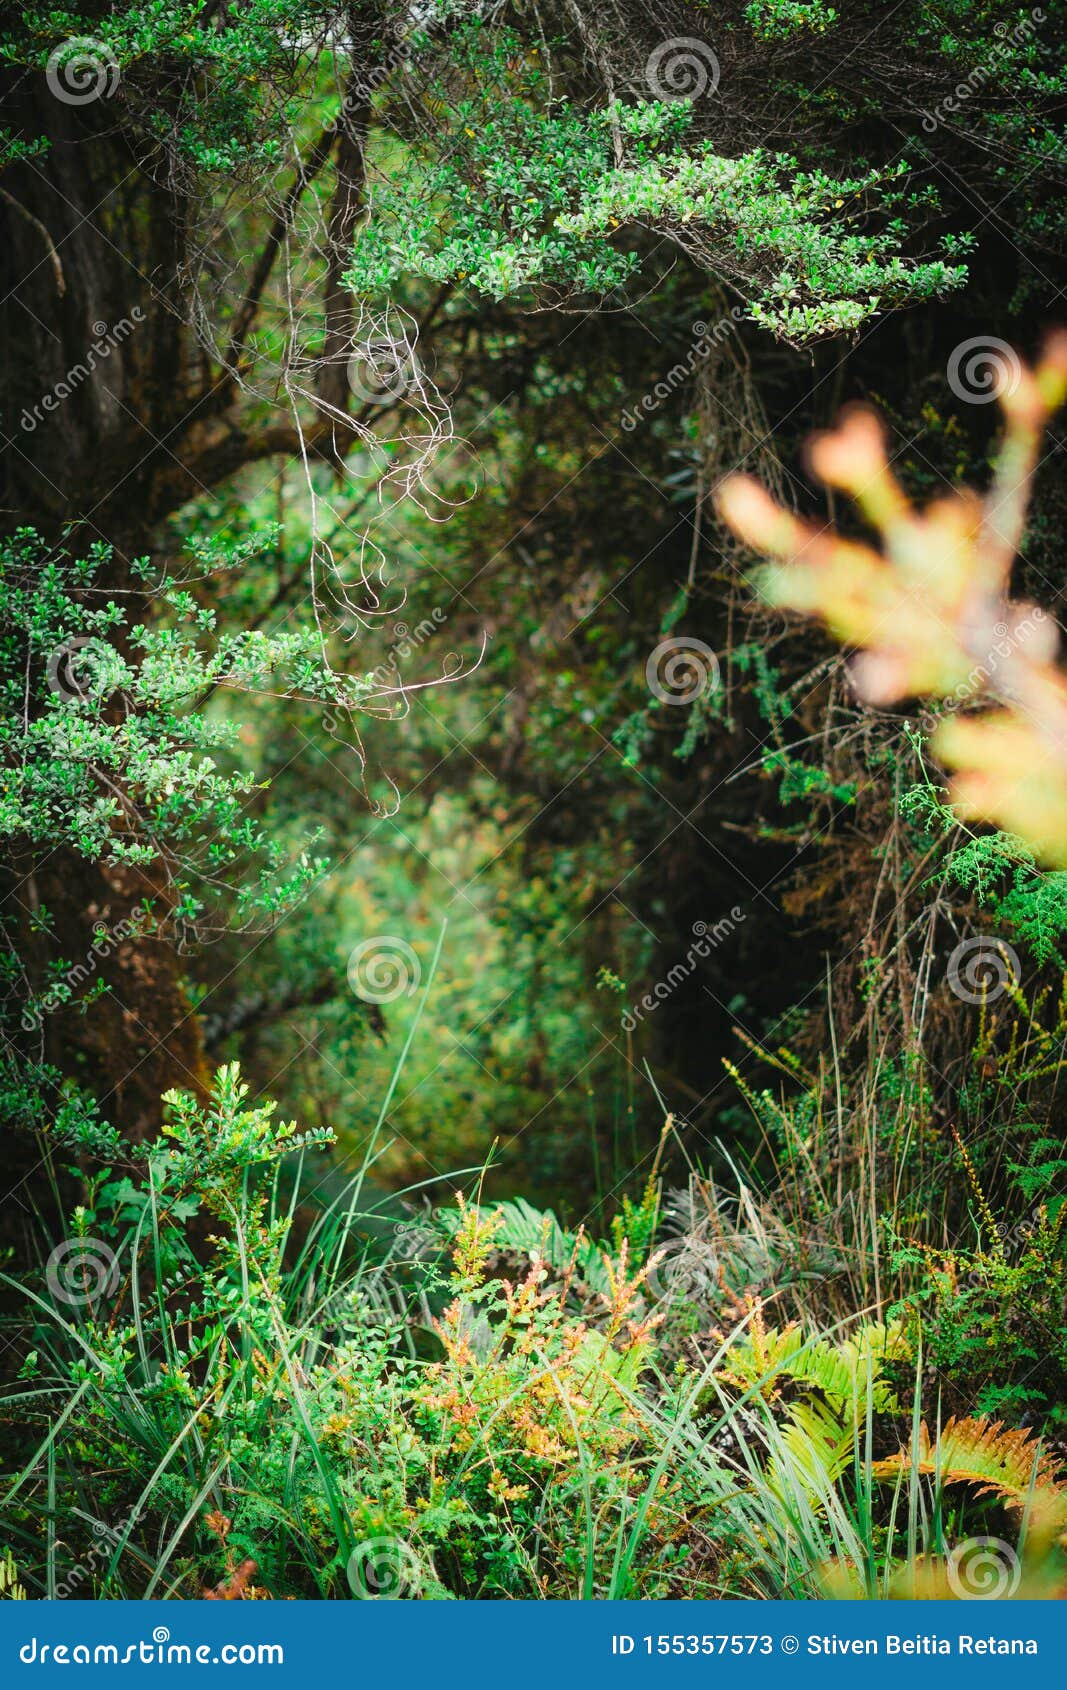 trees and large green vegetation